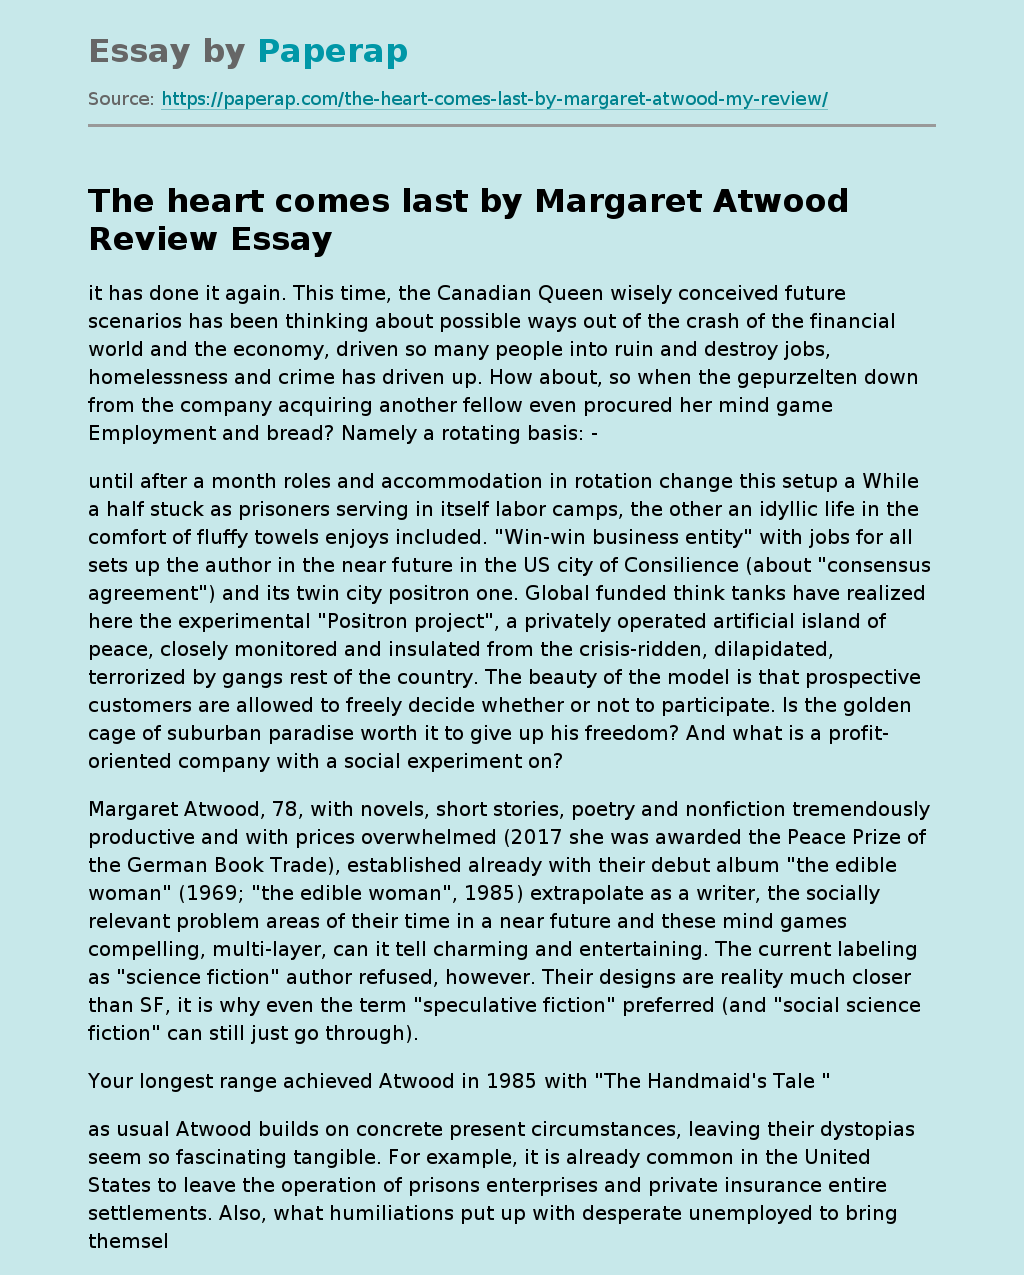 "The Heart Comes Last" By Margaret Atwood